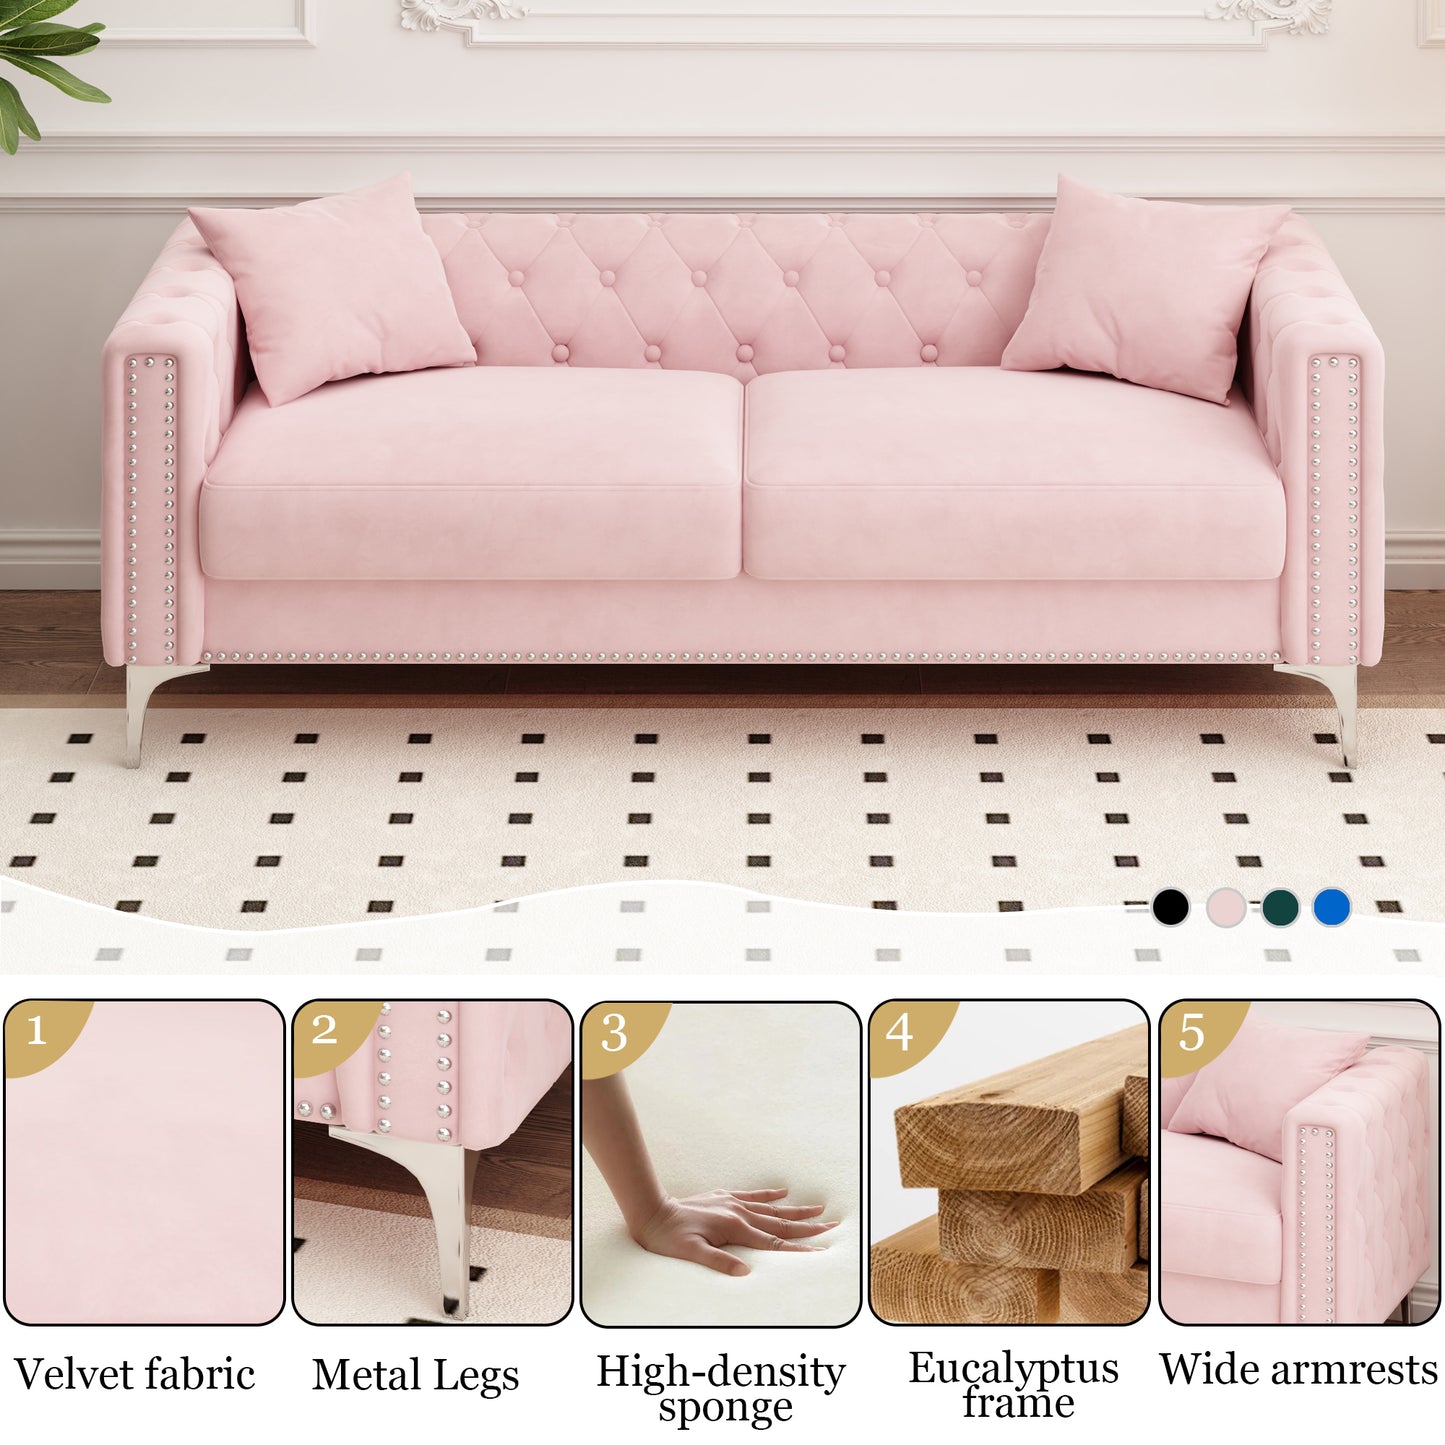 Sofa triple sofa, suitable for large and small Spaces